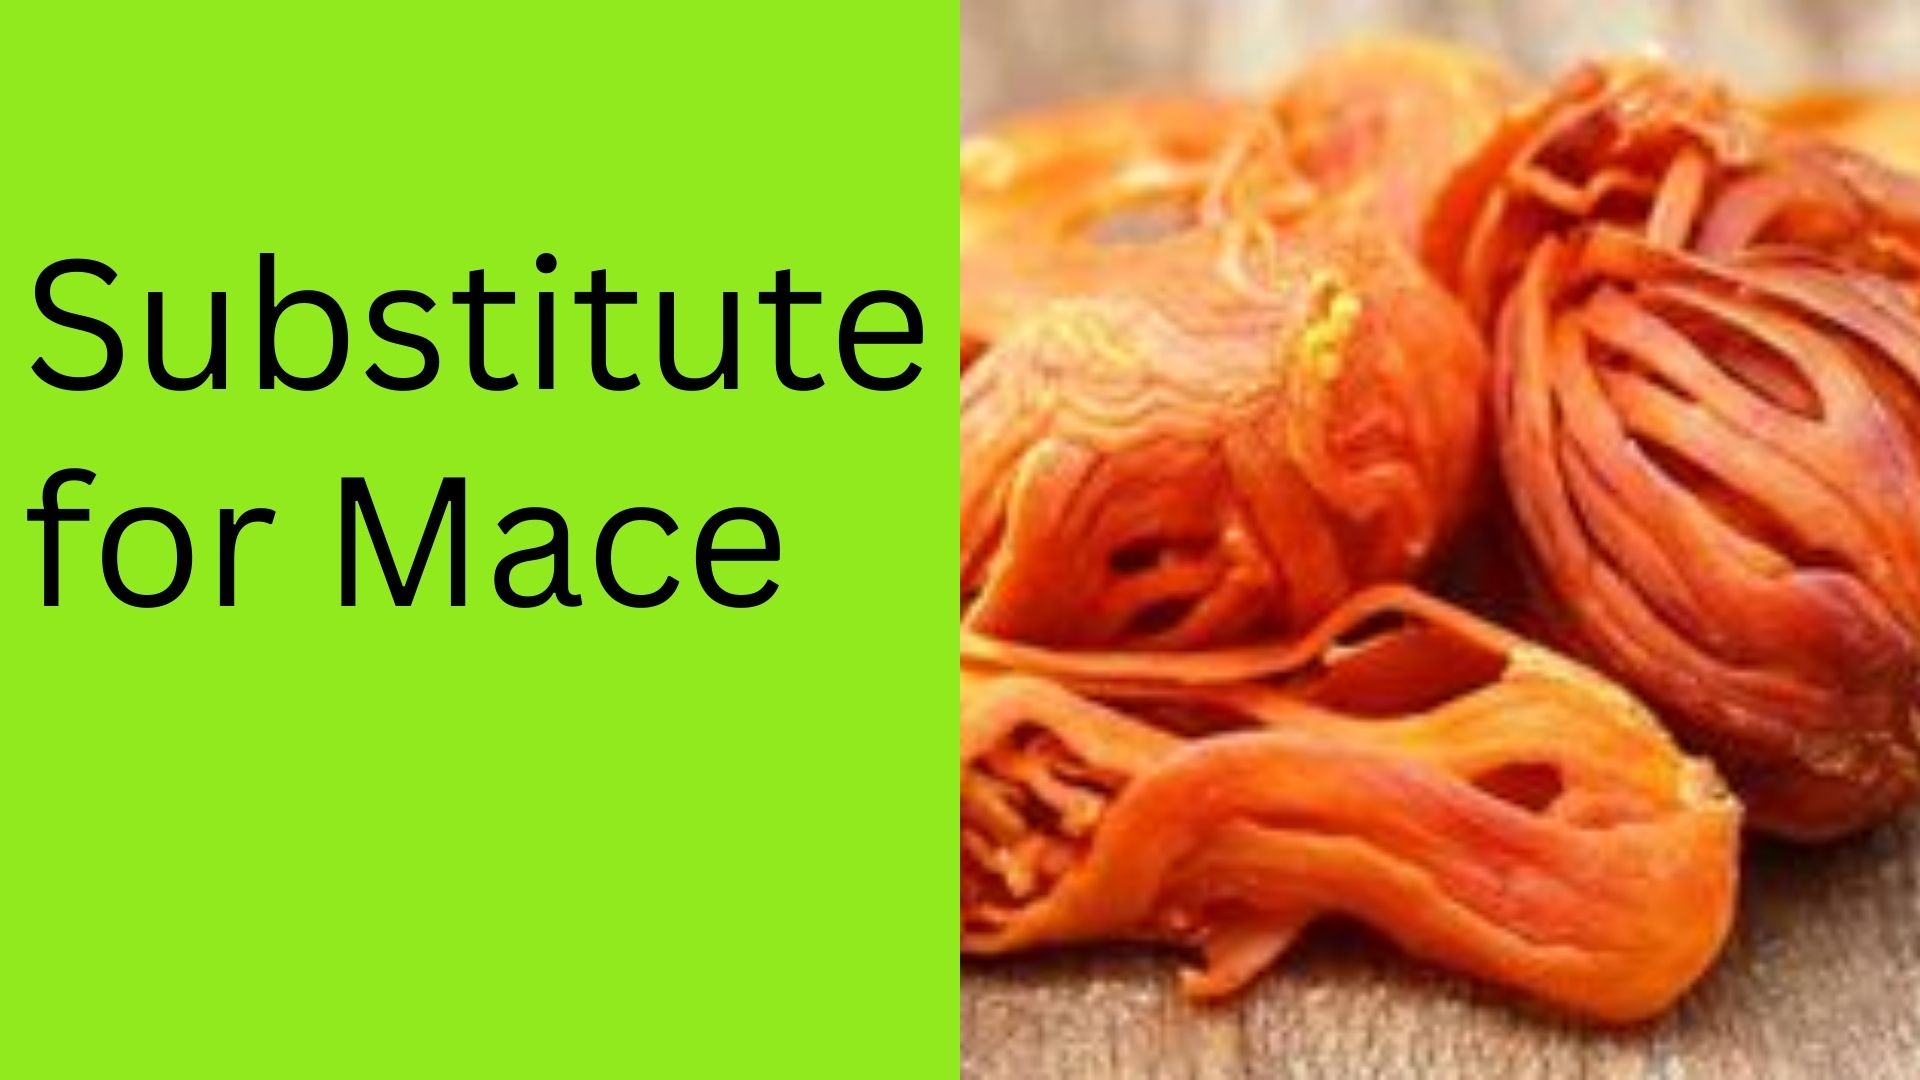 Substitute for Mace